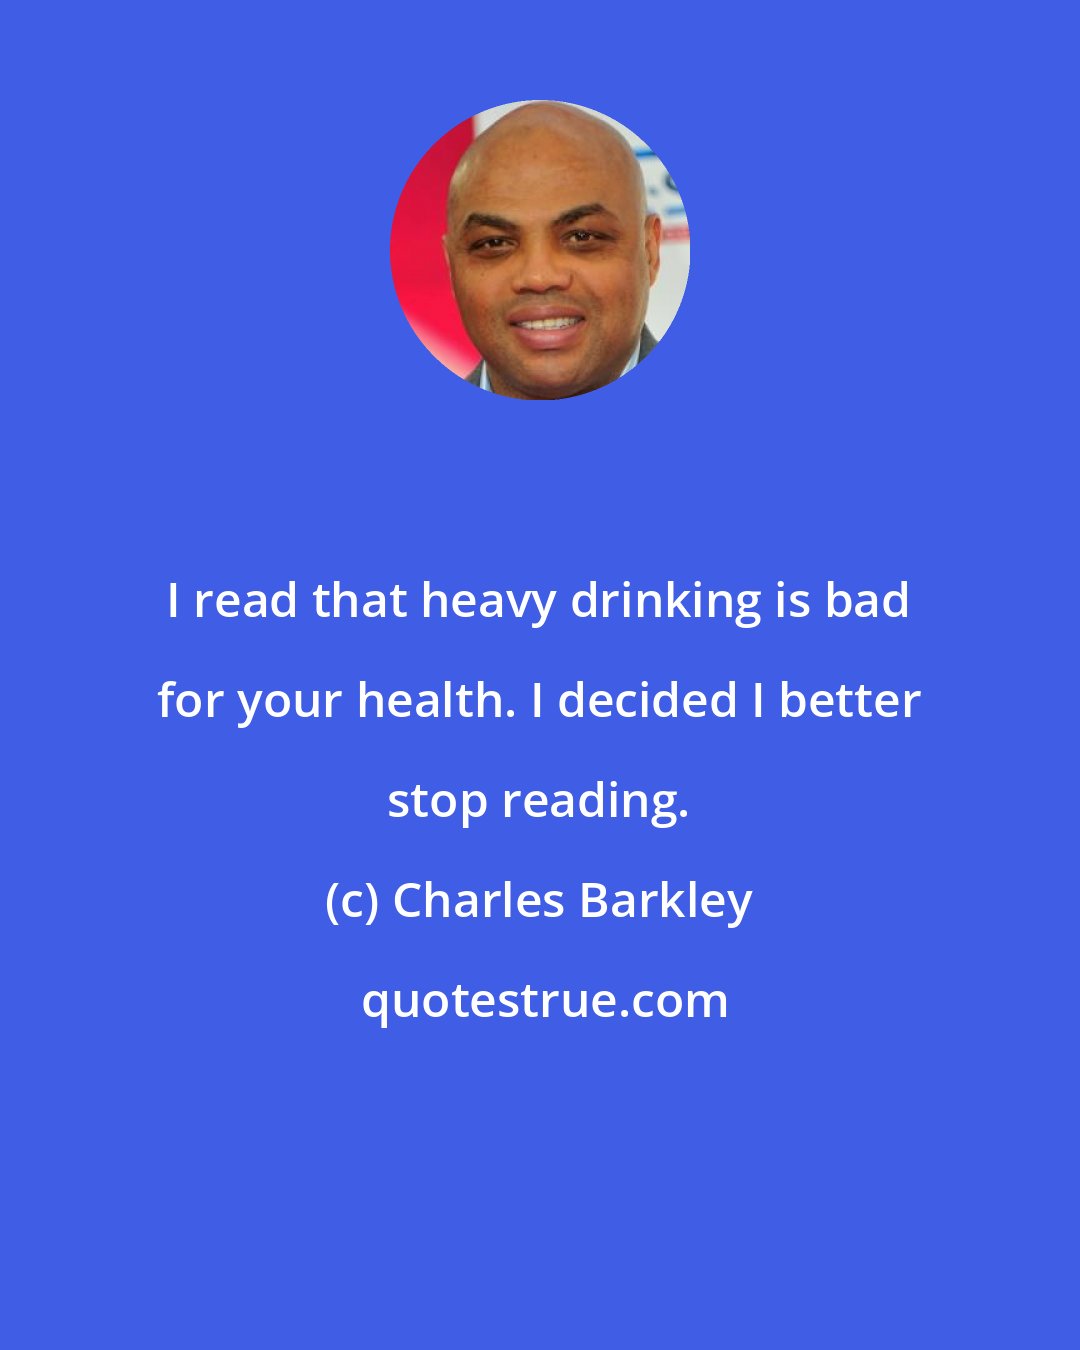 Charles Barkley: I read that heavy drinking is bad for your health. I decided I better stop reading.